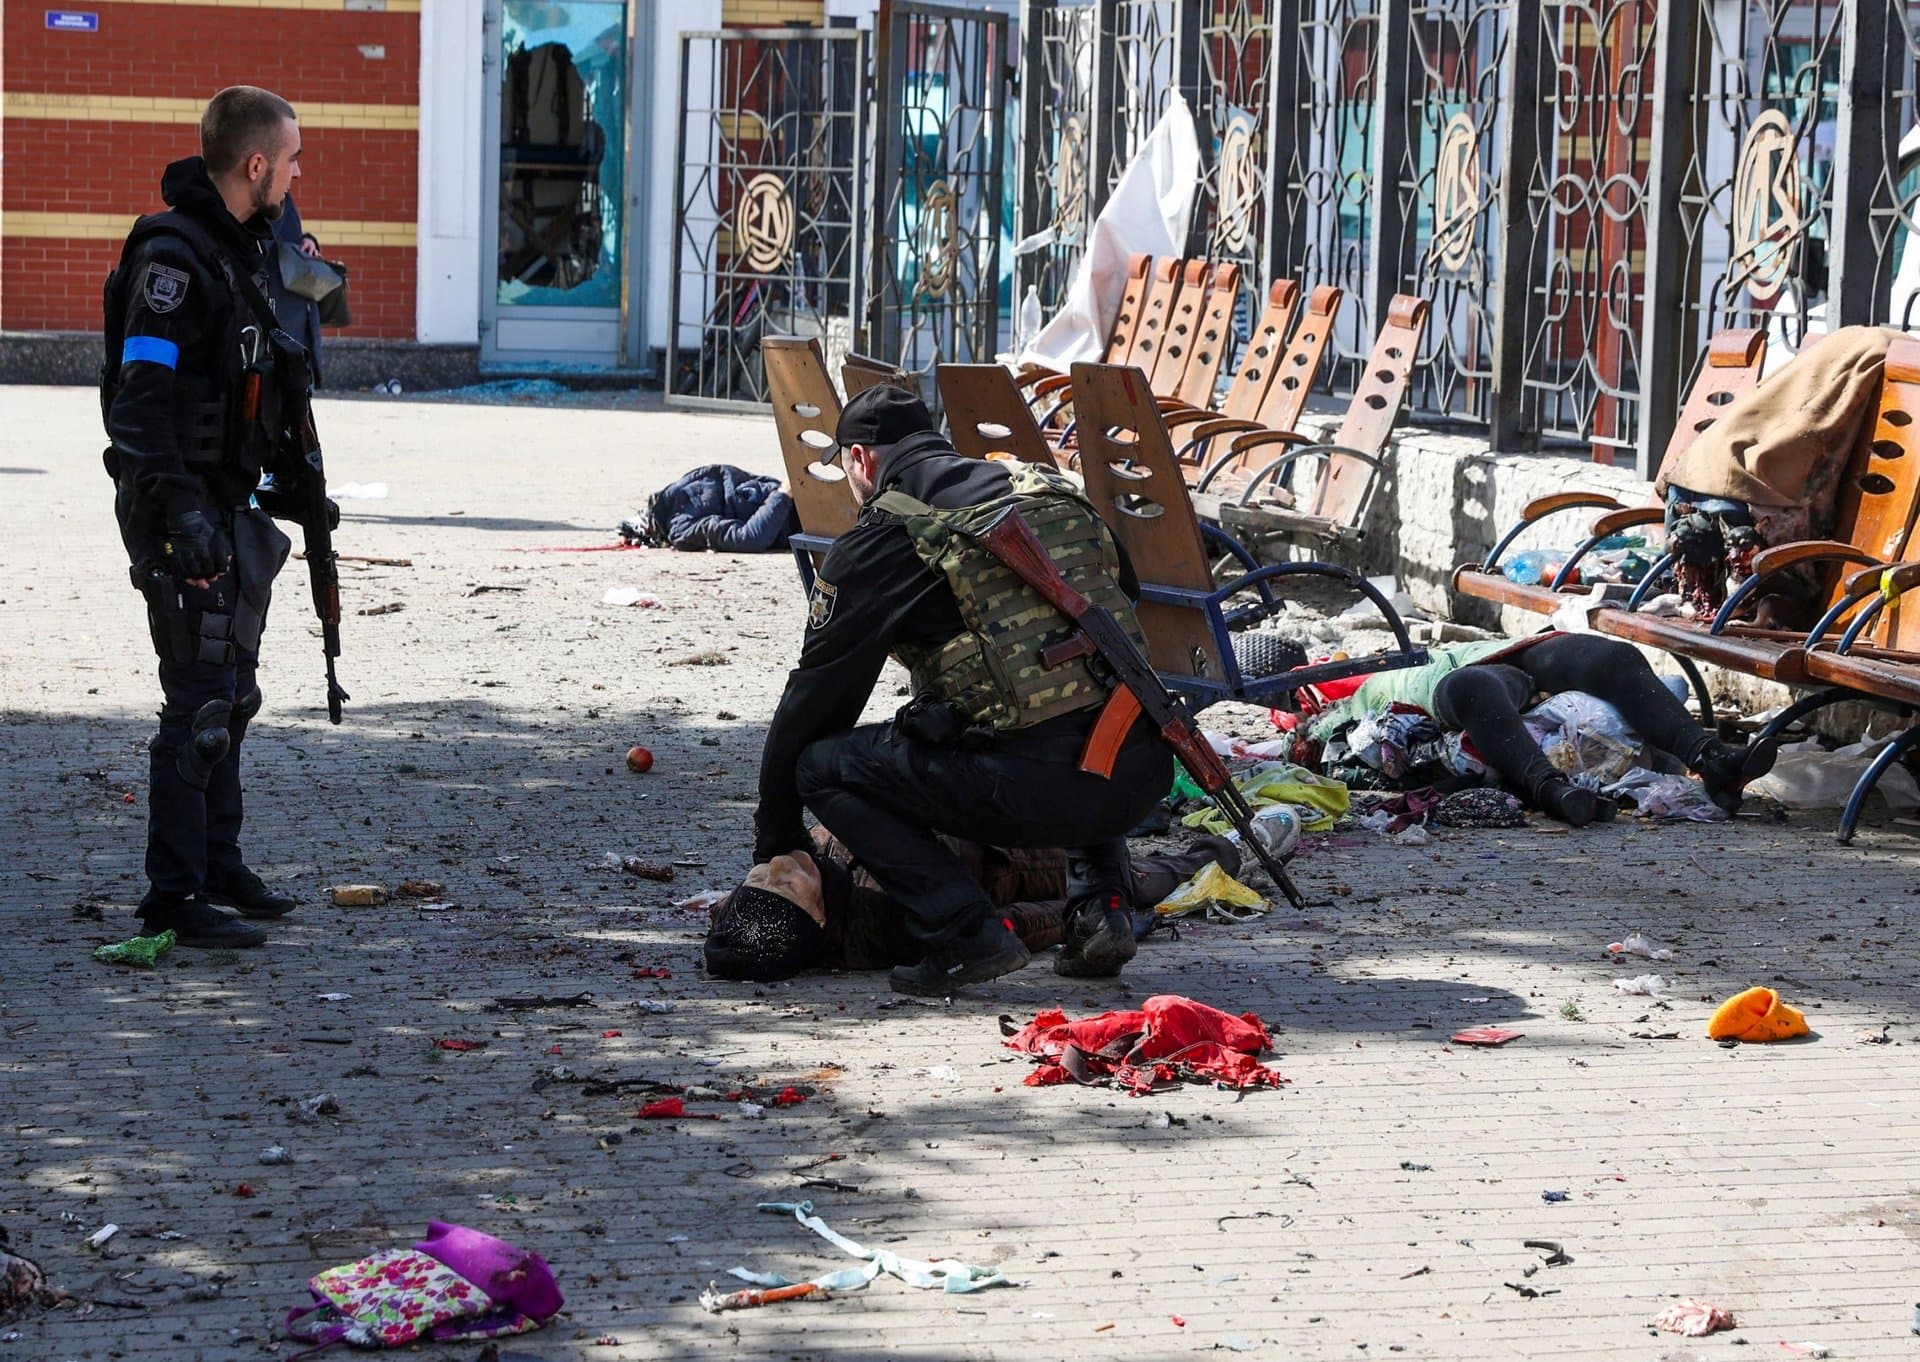 Ukrainian servicemen check for signs of life among casualties lying on the platform in the aftermath of a rocket attack on the railway station in the eastern city of Kramatorsk